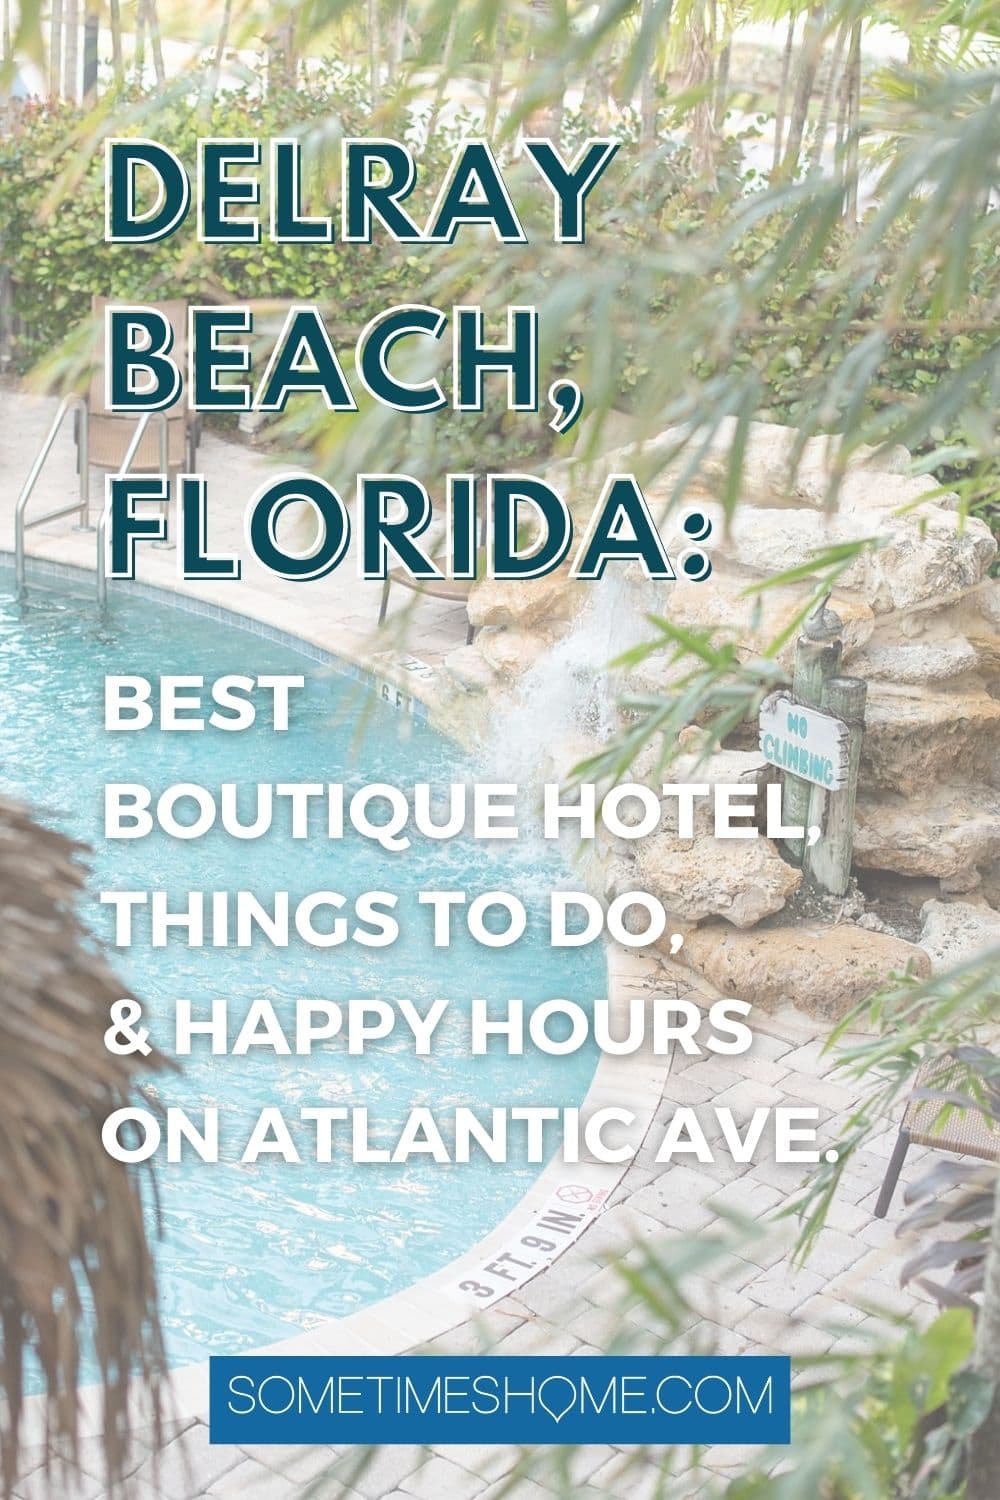 Pinterest image with a photo of the hotel property with palm trees and colorful paint, about Delray Beach, Florida.